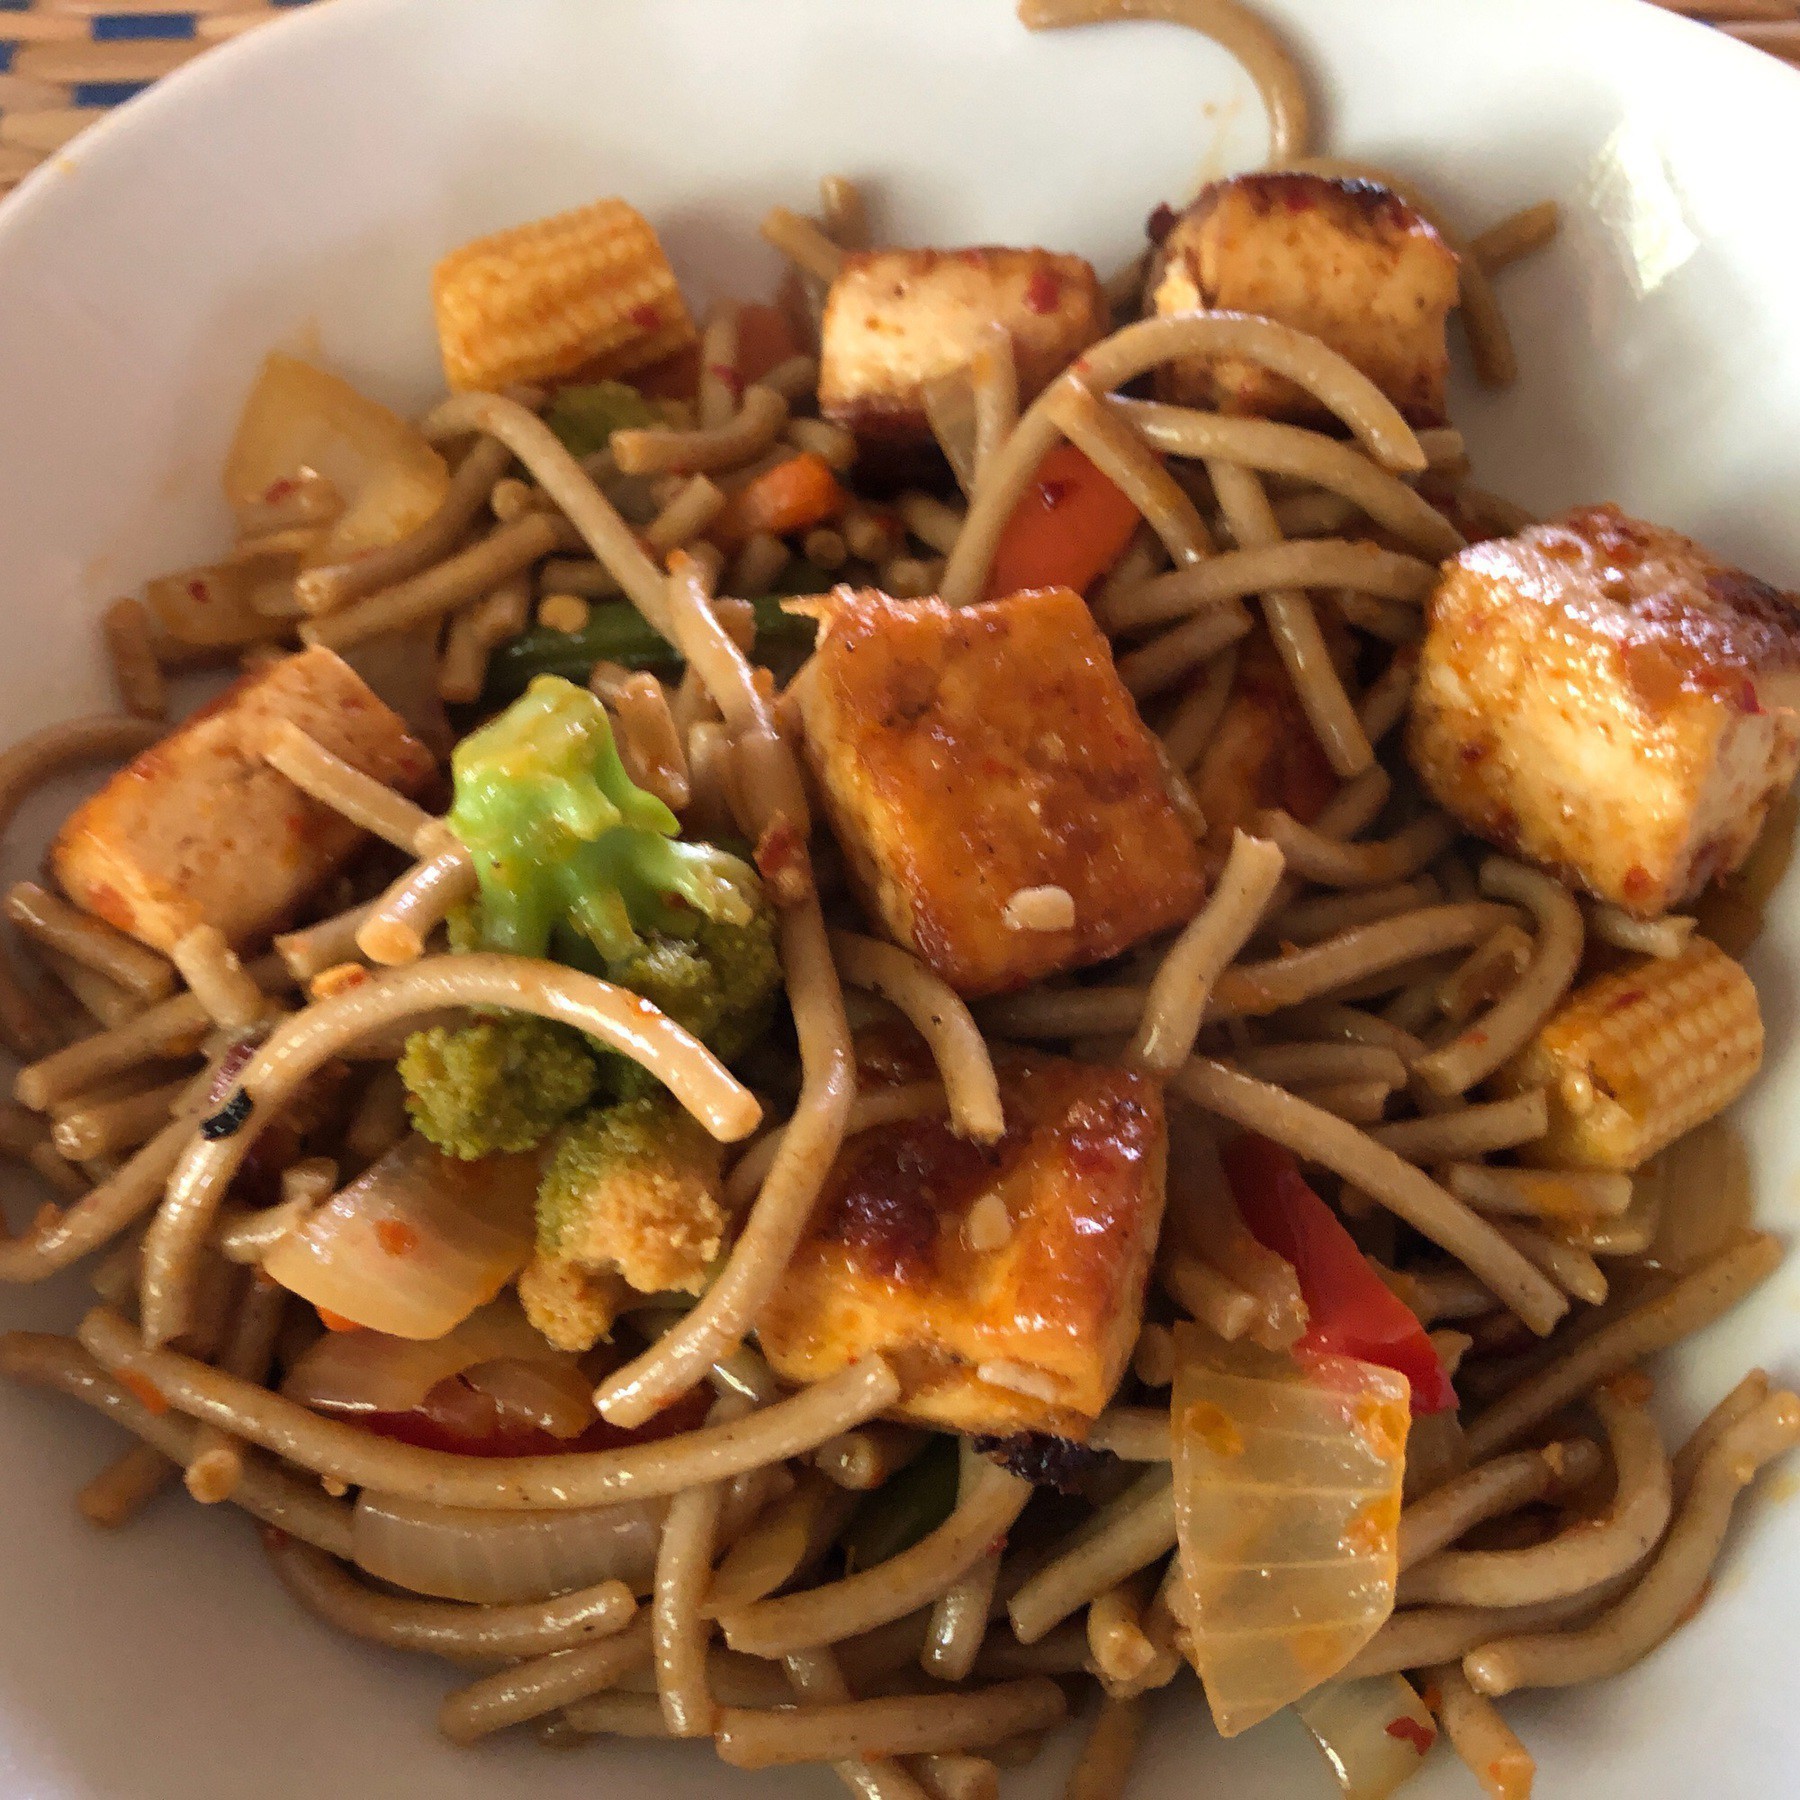 Sobs noodles, veggies, and tofu in a bowl.